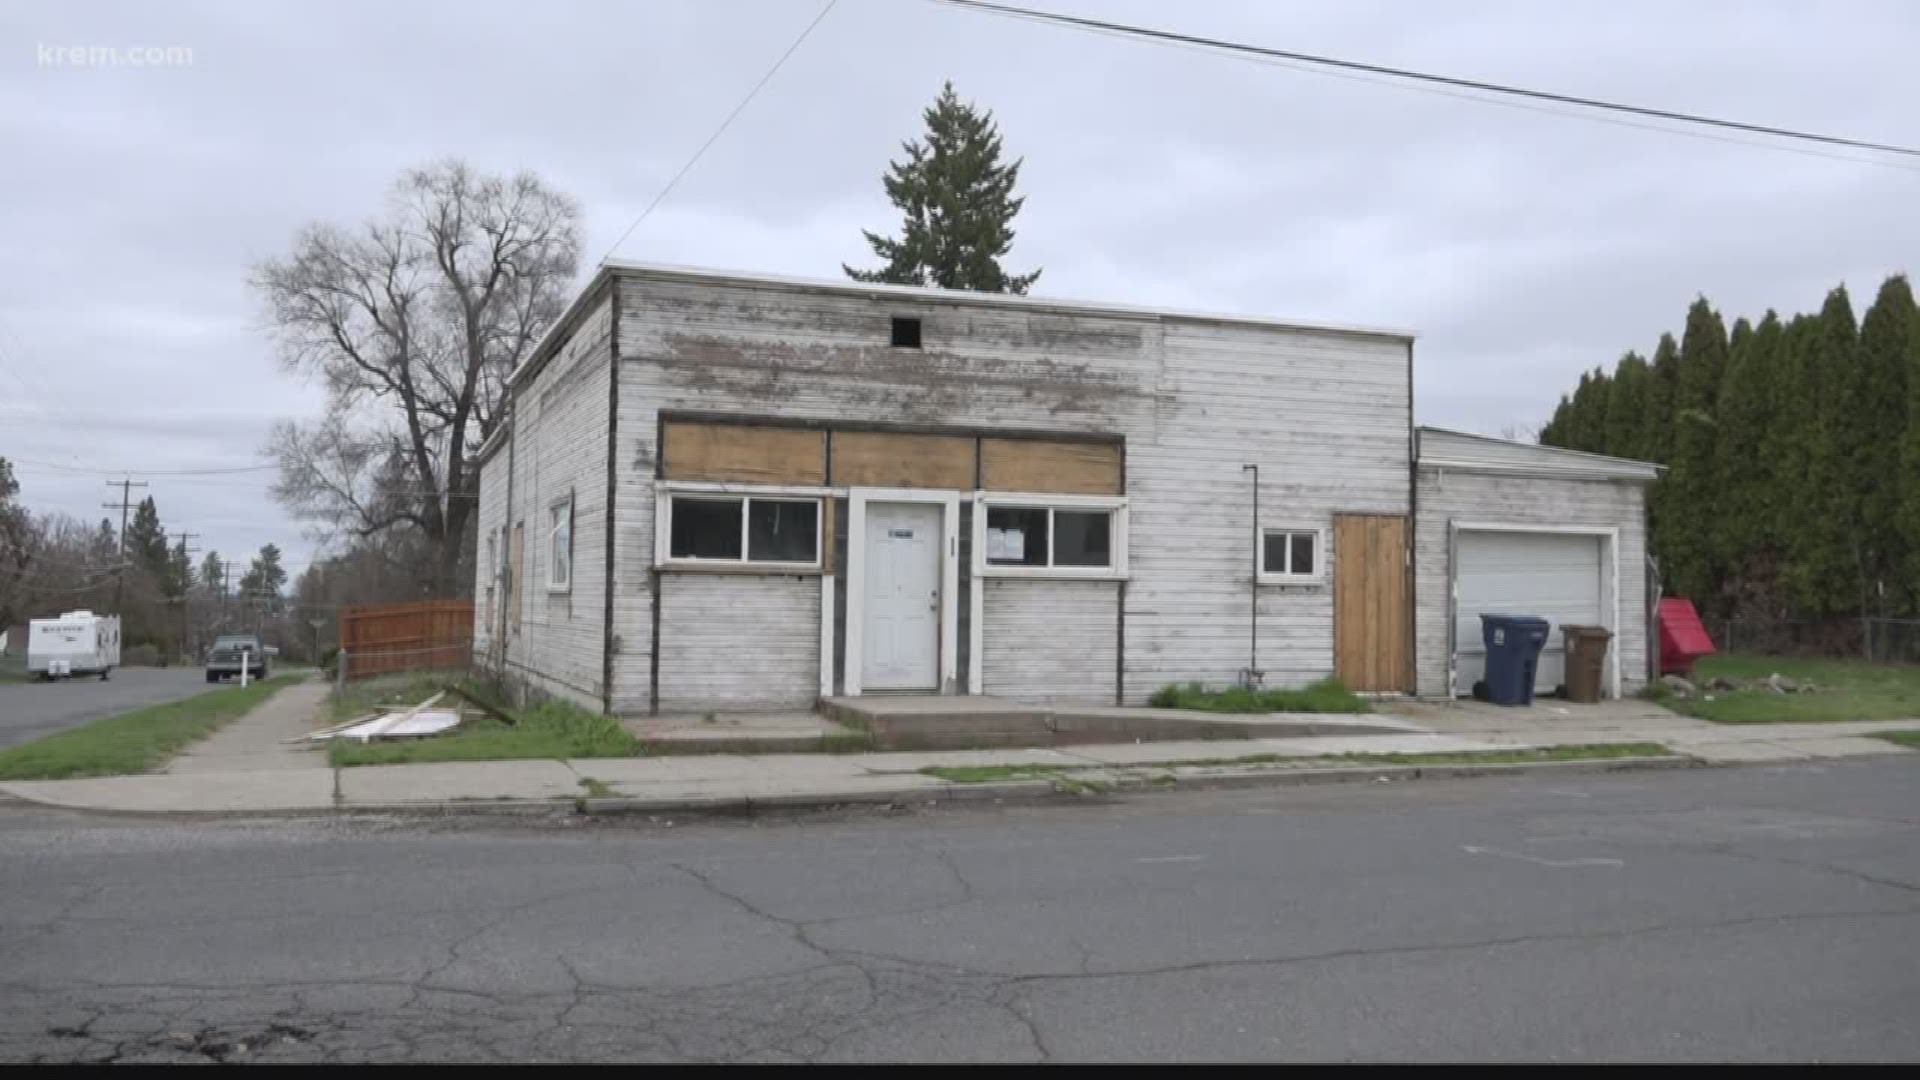 New cafe proposed in Perry neighborhood, residents say not so fast